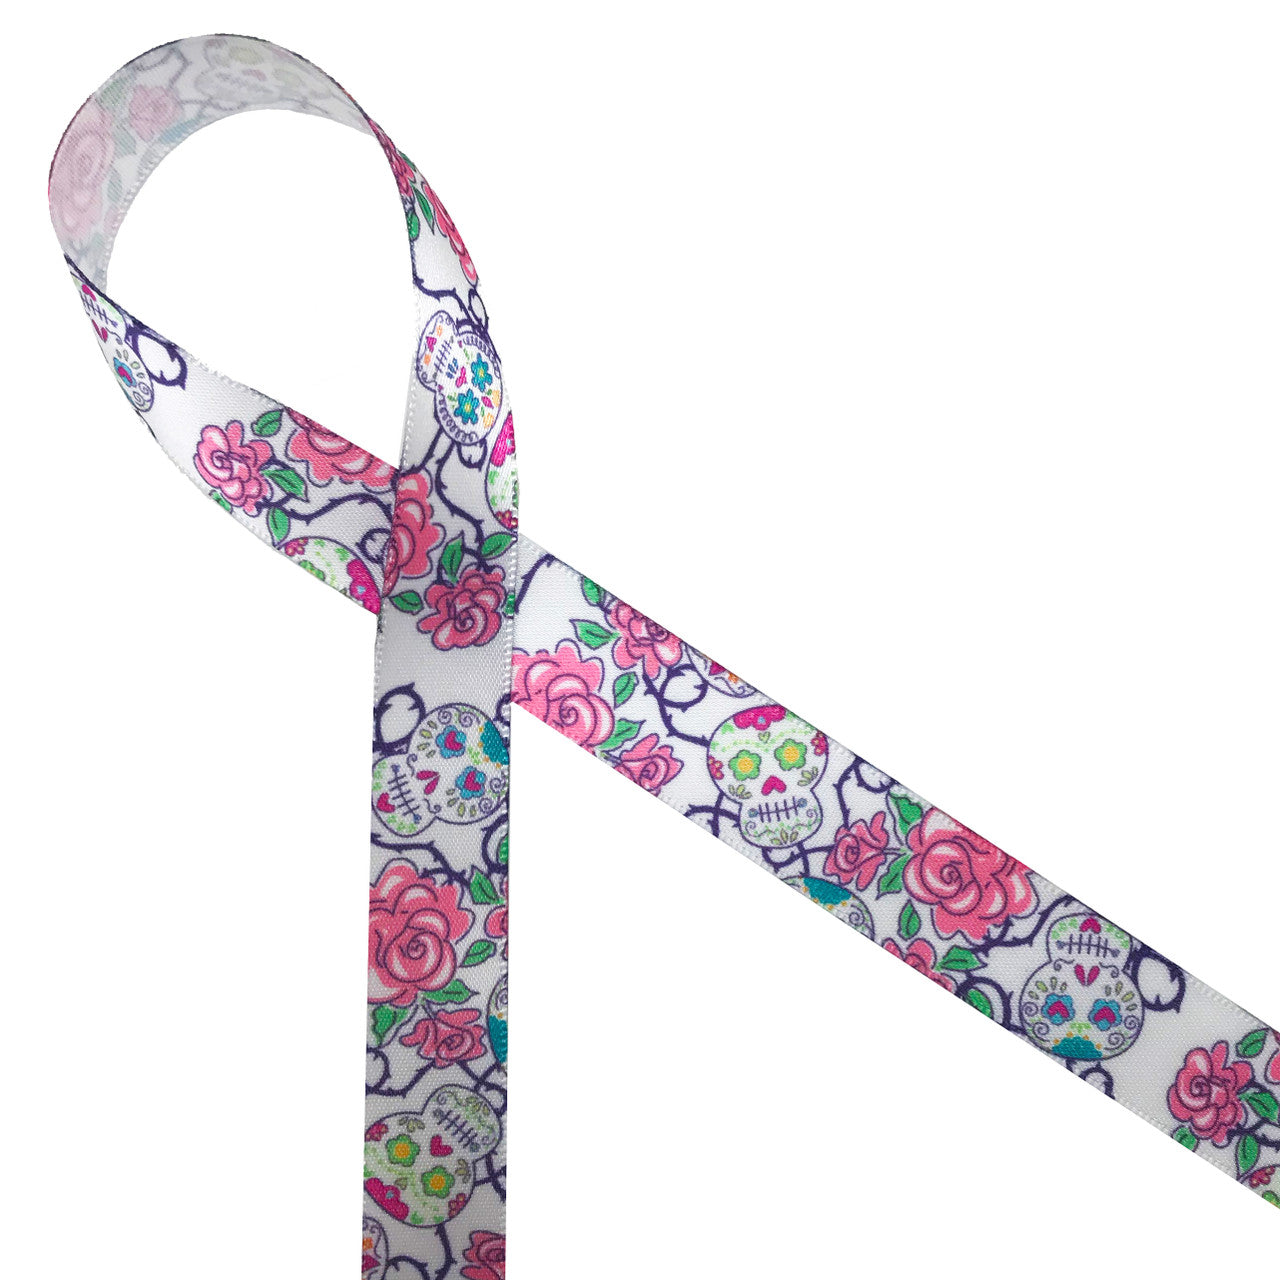 Sugar Skulls ribbon with roses for Day of the Dead celebrations printed on 5/8" white single face satin